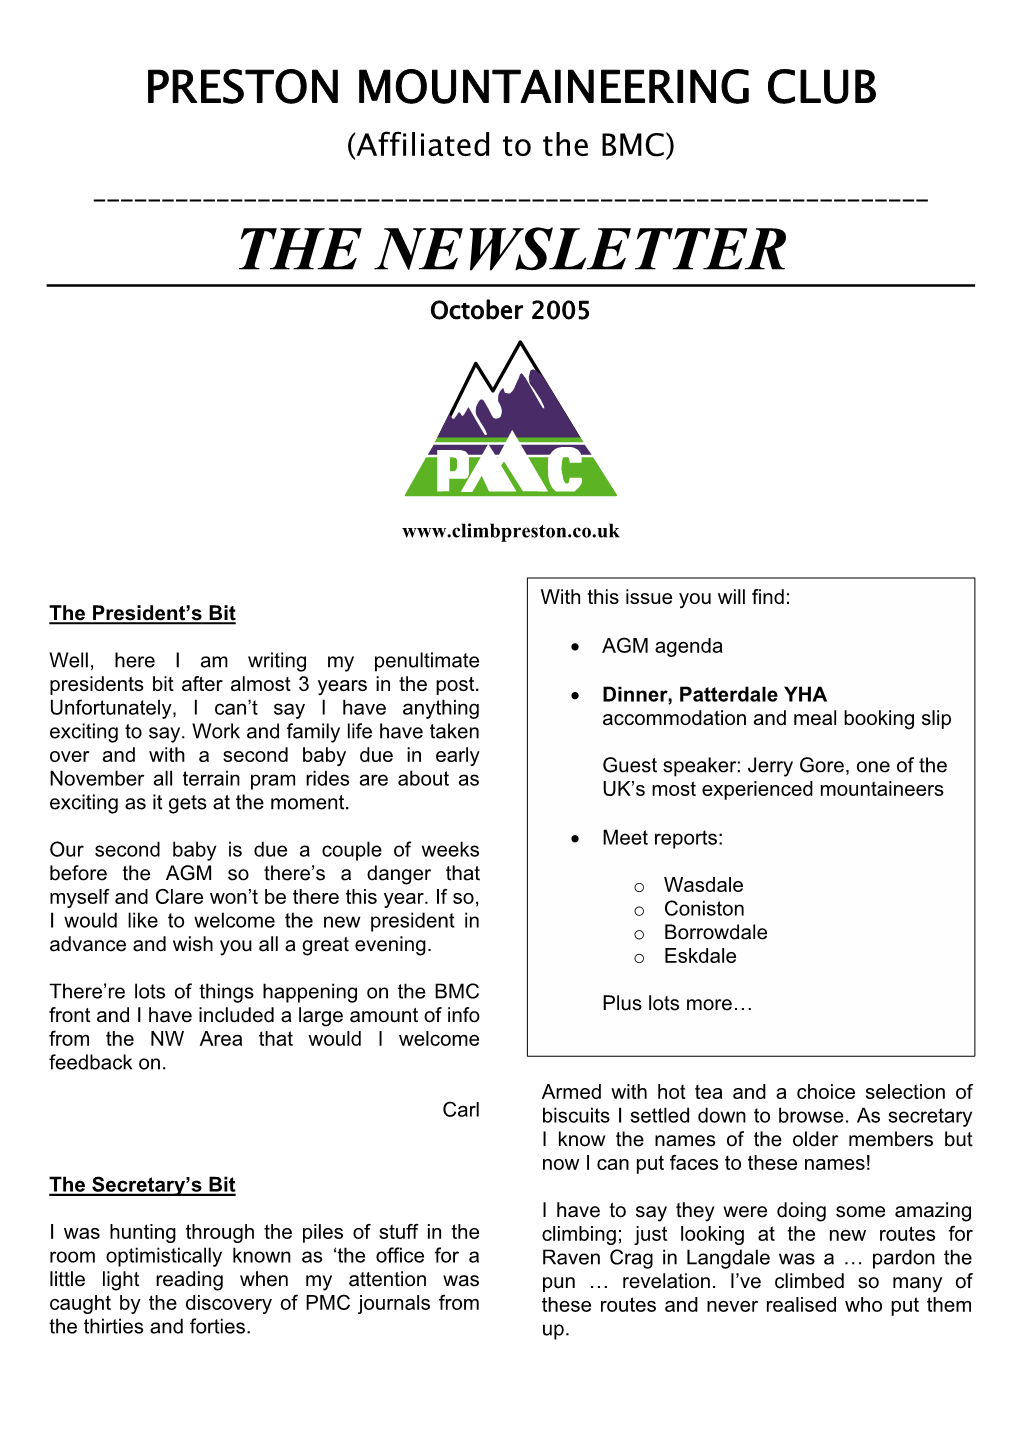 PRESTON MOUNTAINEERING CLUB (Affiliated to the BMC) ______THE NEWSLETTER October 2005